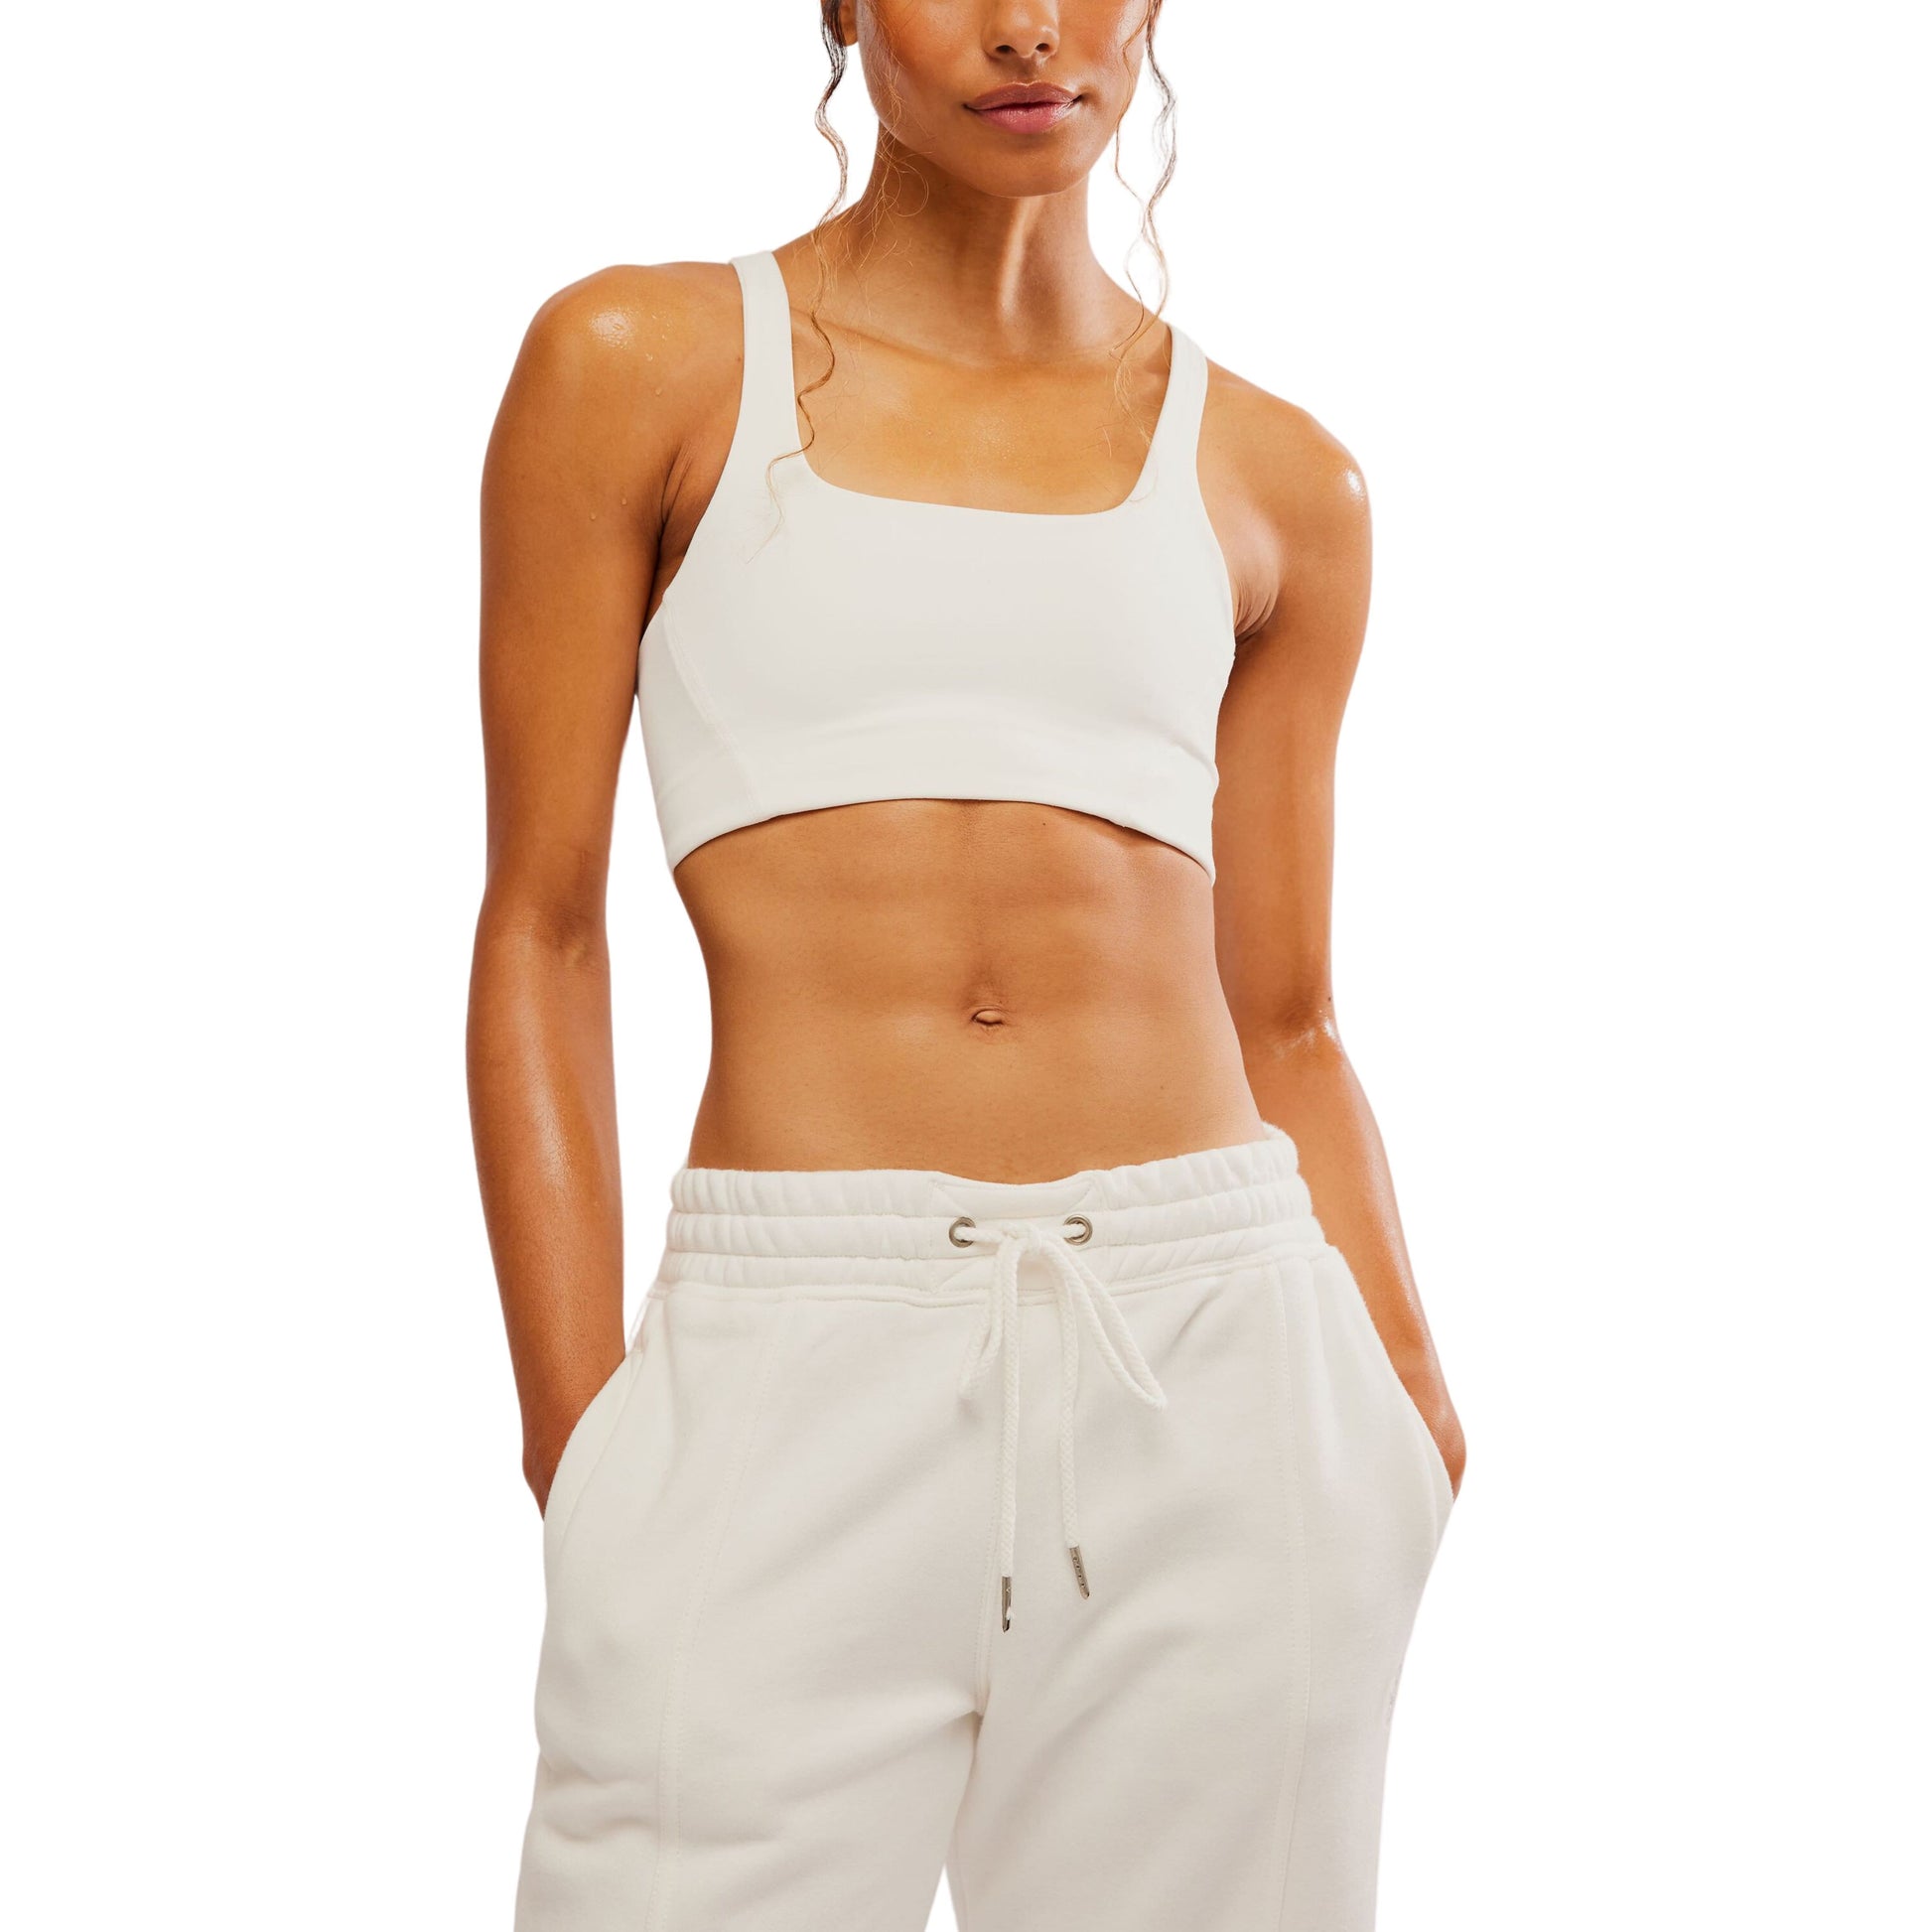 A woman wearing a Free People Movement Never Better SQ Neck Bra in White and cream drawstring joggers, standing with her hands on her hips.